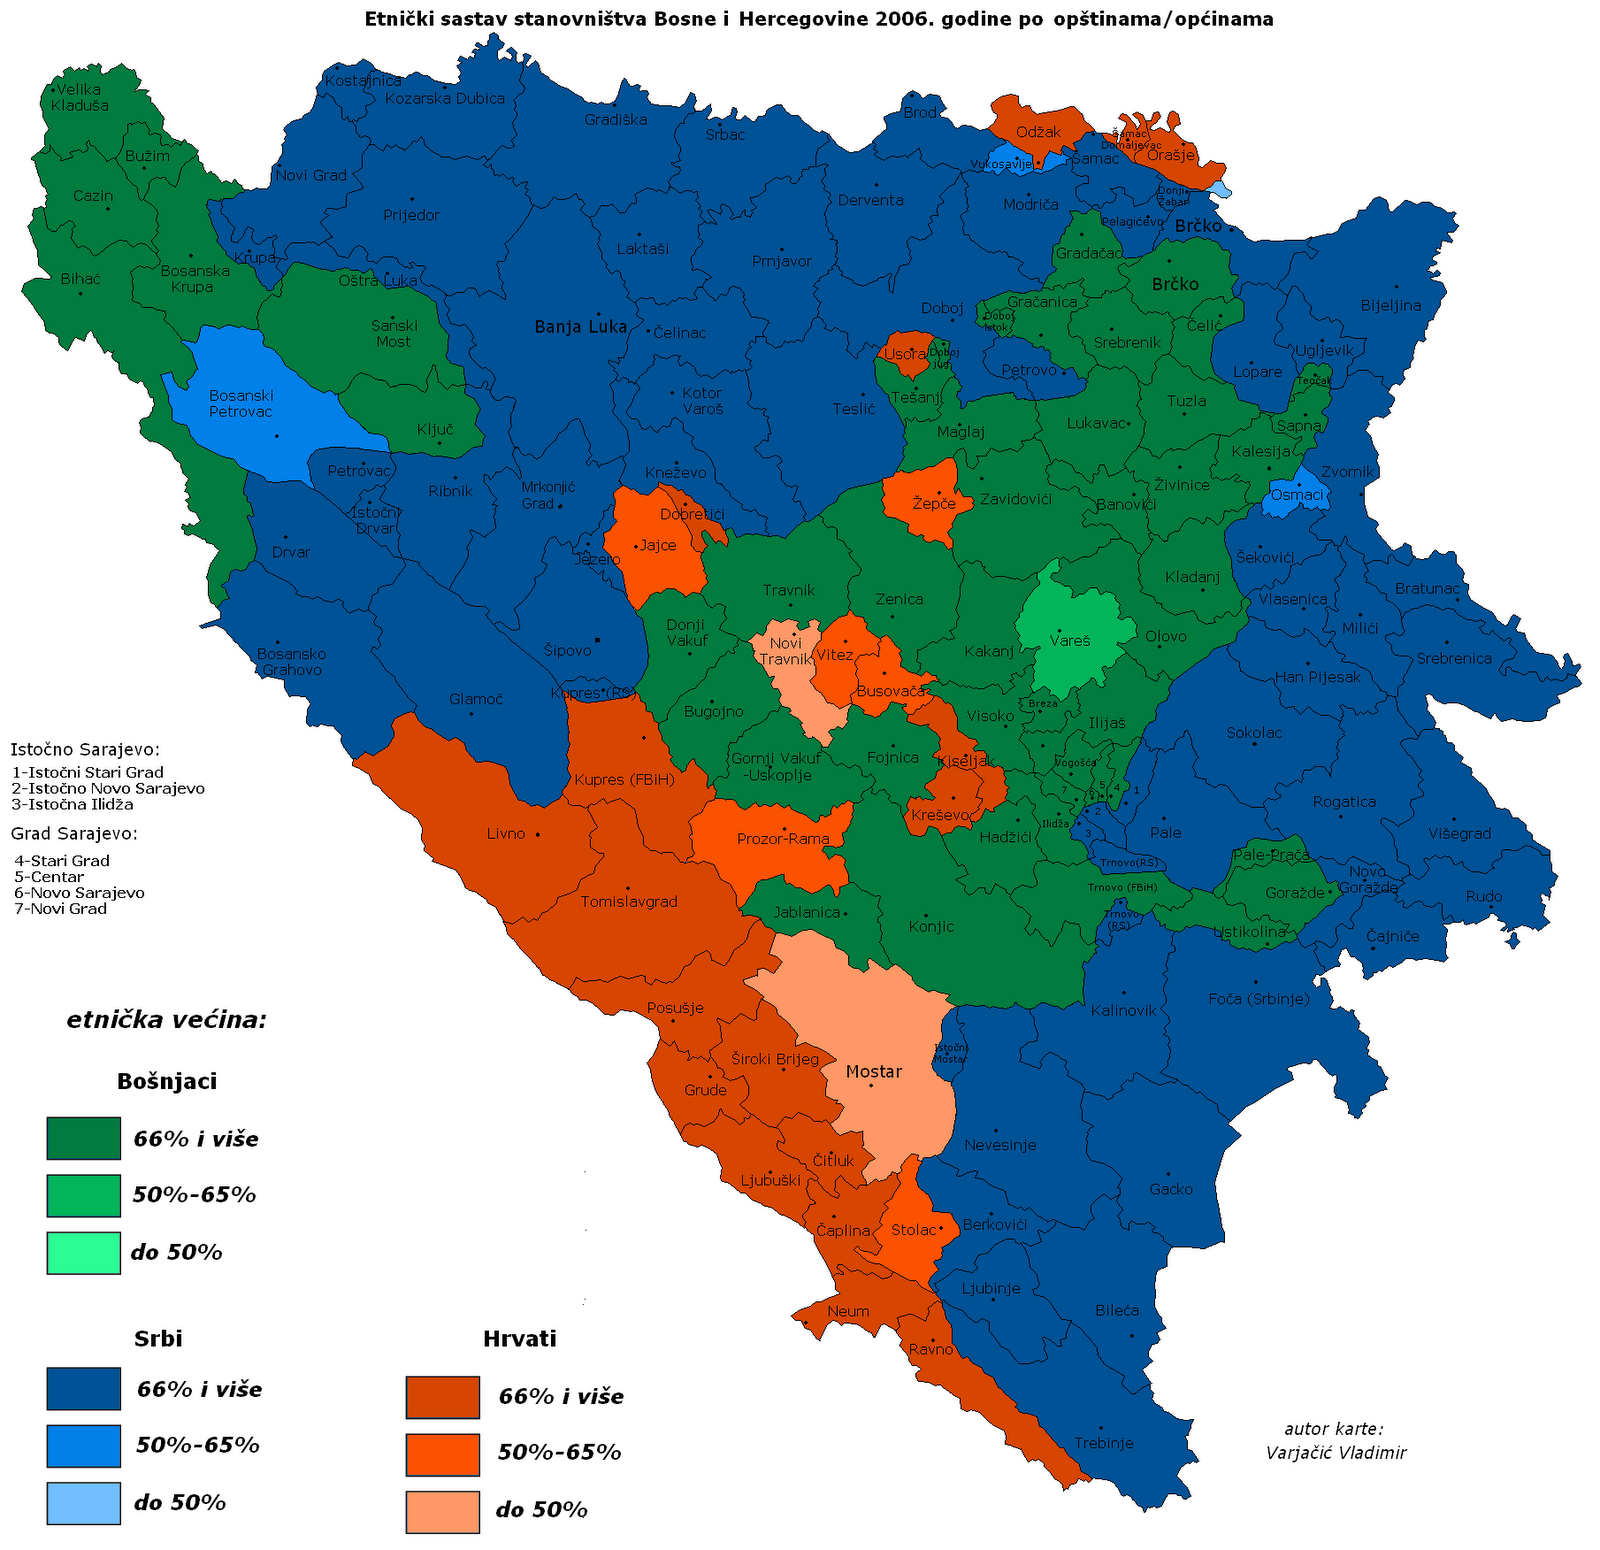 [bosnia-ethnic-composition-after-ethnic-cleansing-2006.png]